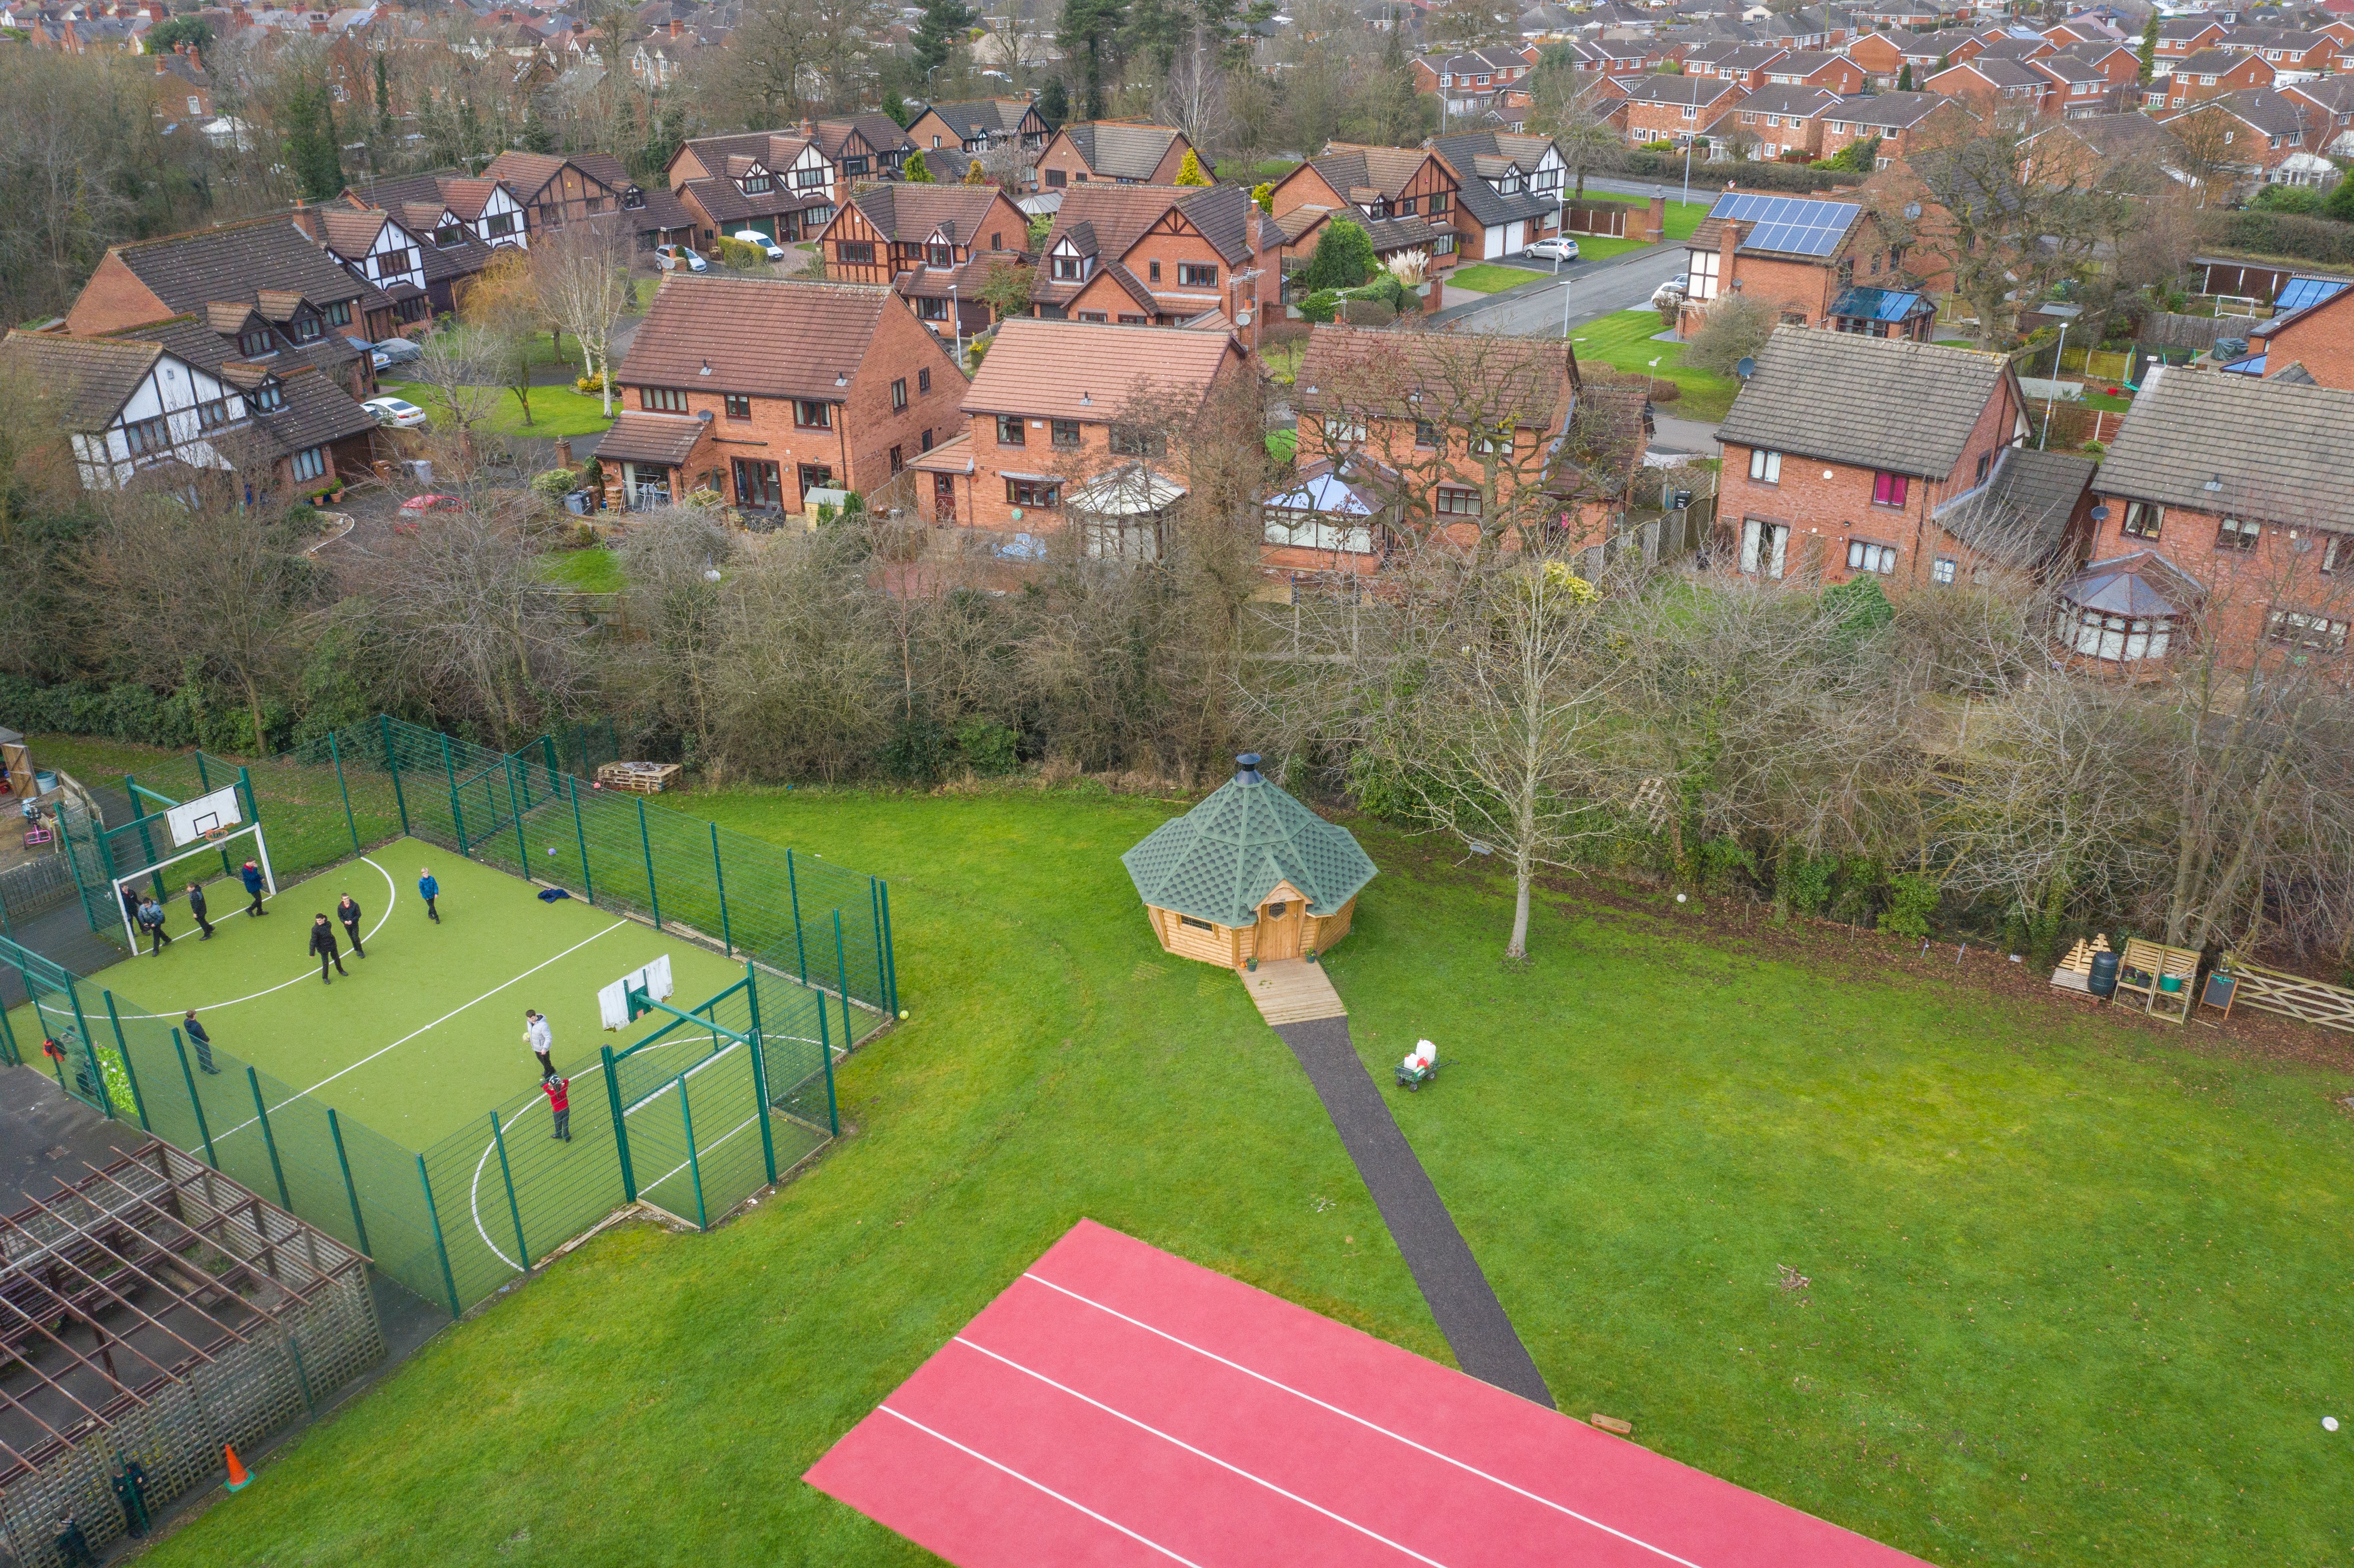 Overhead shot of a school log cabin with green roof next to school tennis courts